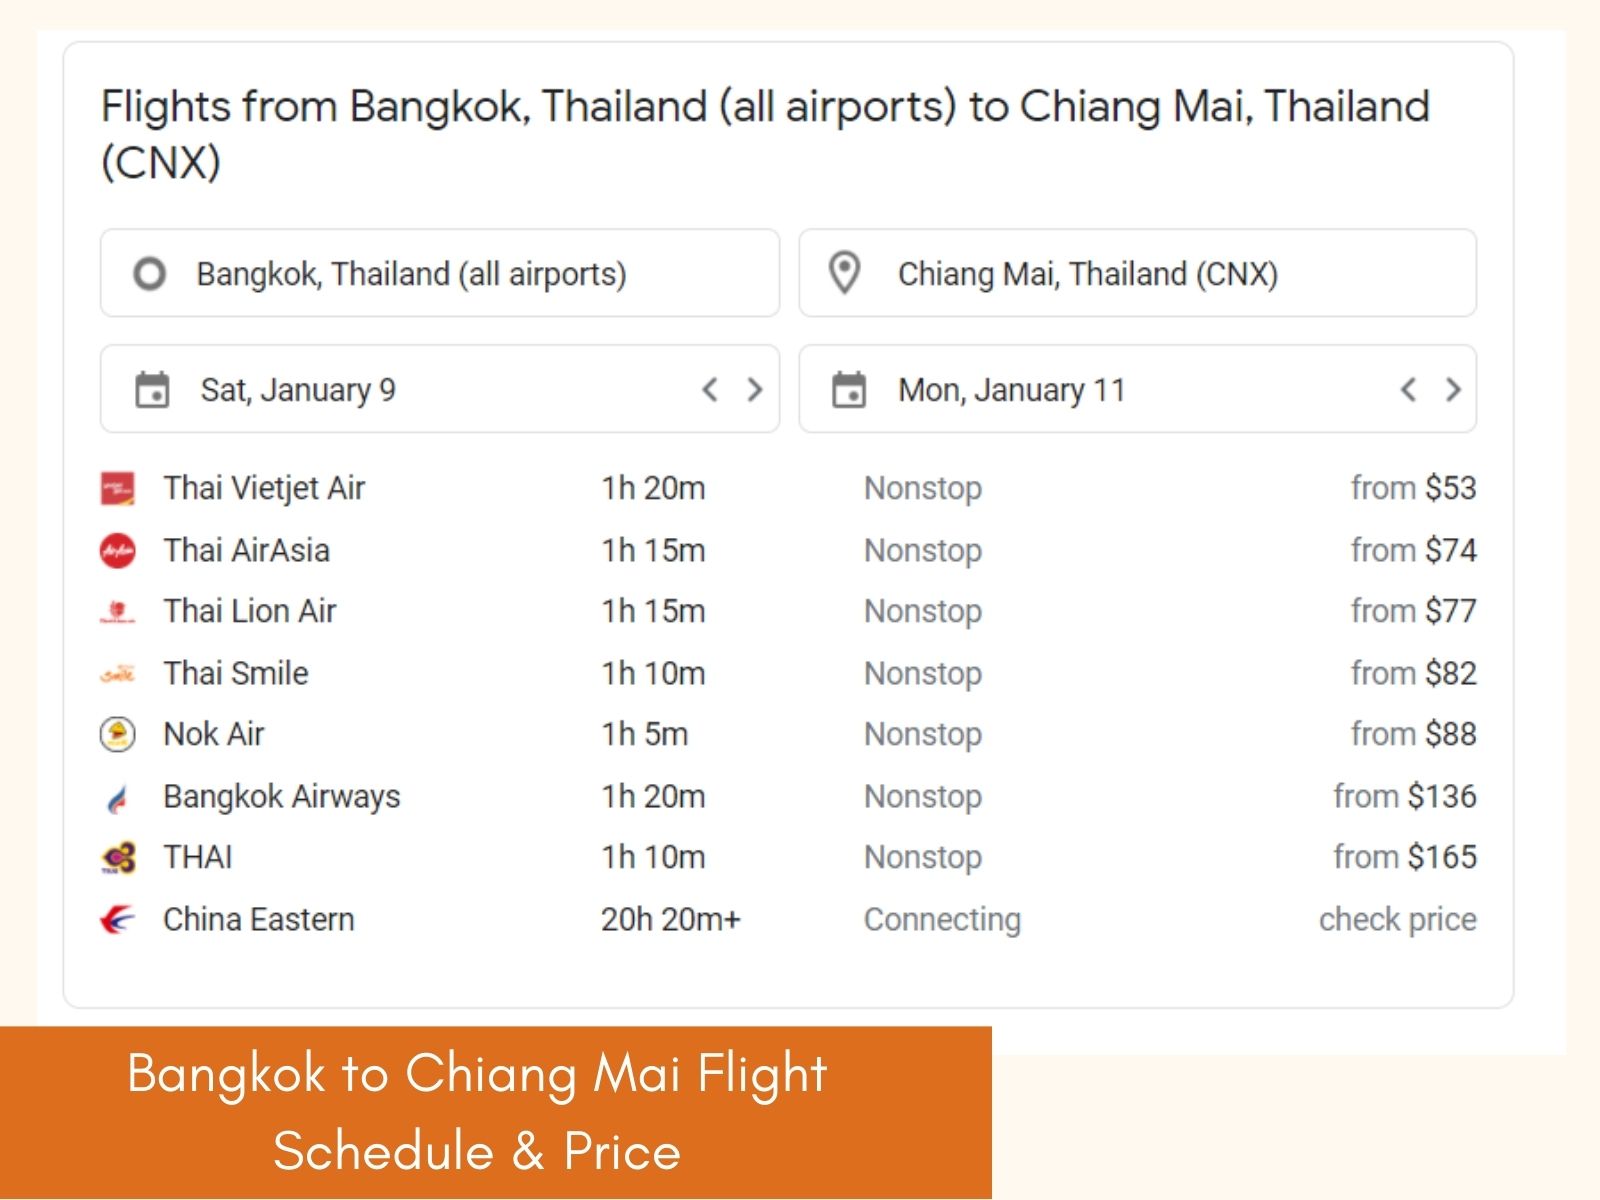 Bangkok to Chiang Mai Airline flight and price